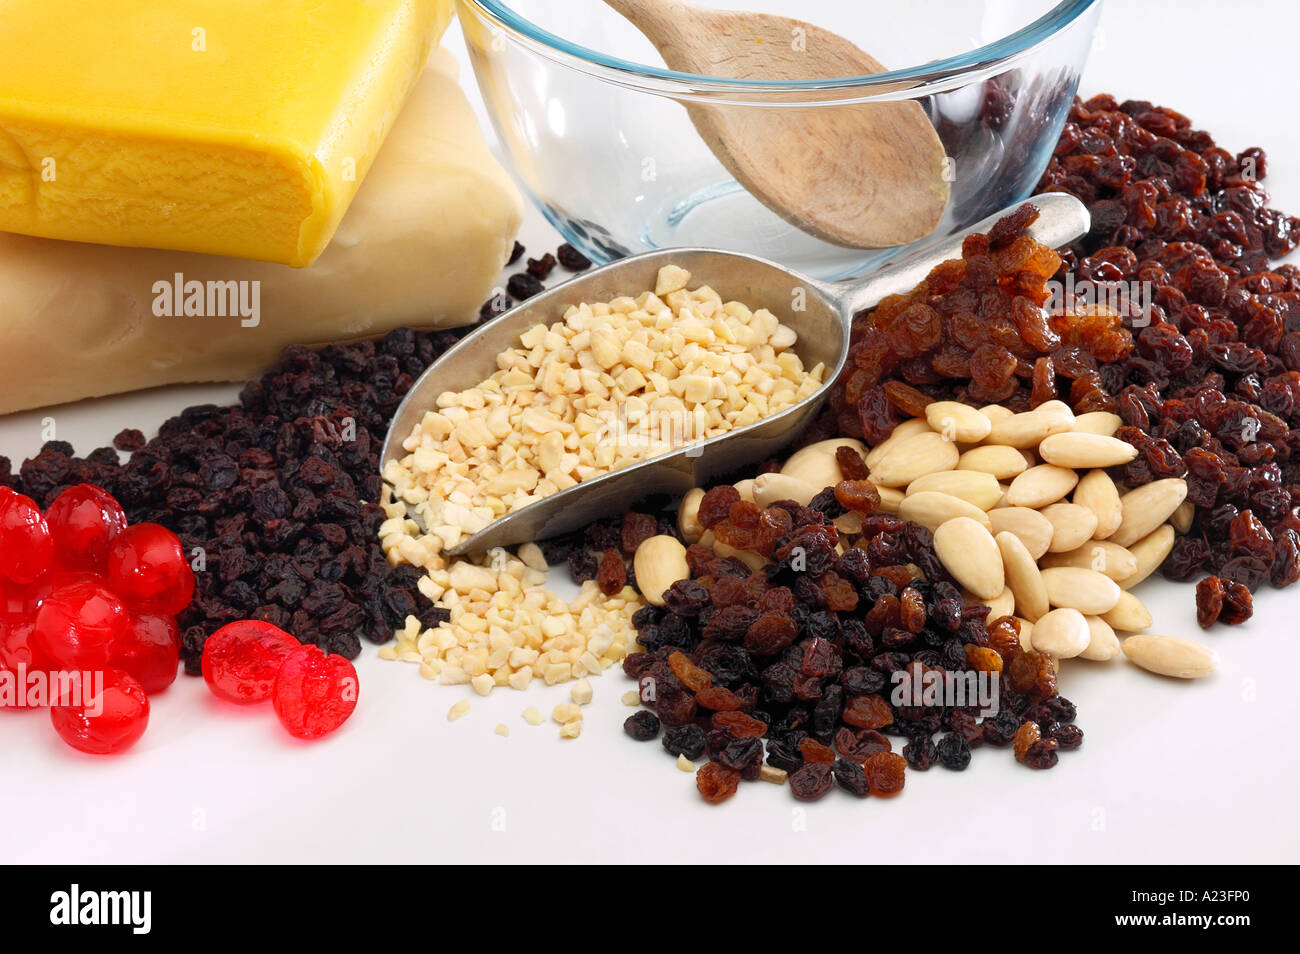 Selection of dried fruit nuts and marzipan raisins sultanas currants cherries almonds chopped whole Stock Photo